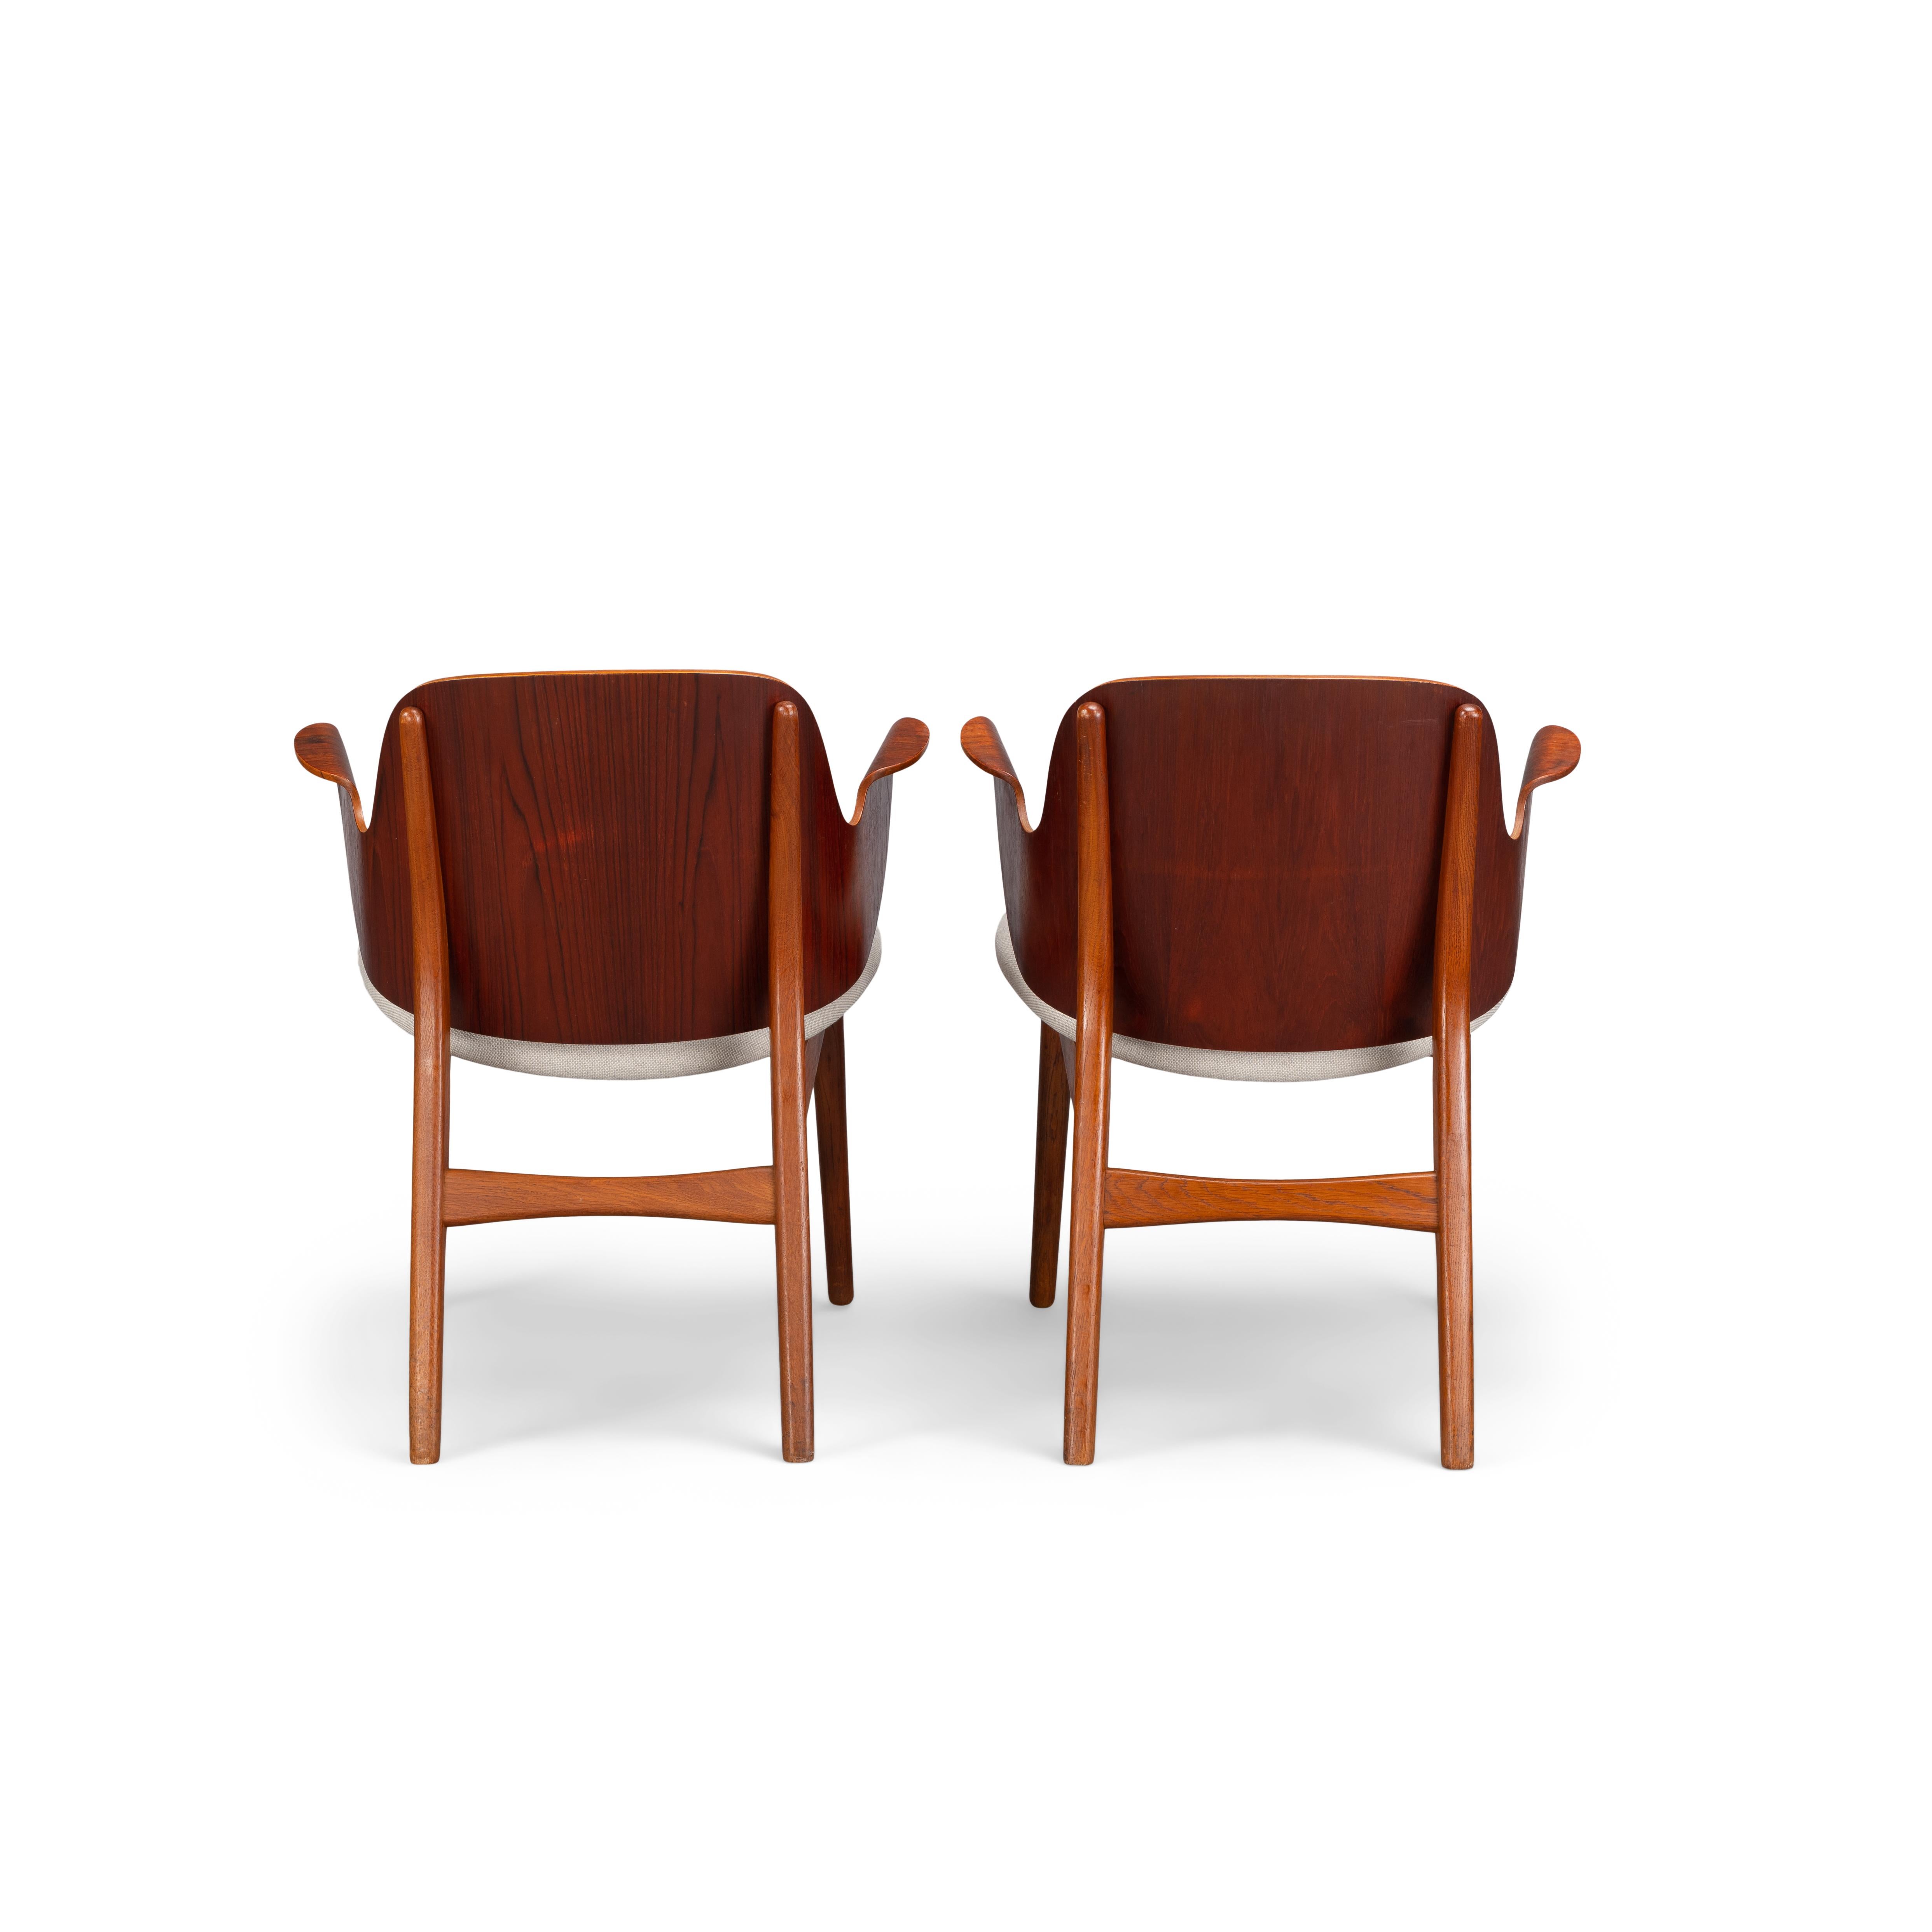 This pair of armchairs was designed by Arne Hovmand Olsen in the 1960s. These rare chairs are produced by high end cabinetmaker Bramin Møbler and are made of solid teak, plywood en reupholstered with Ploegwool Kl. 91. The armchairs are only sold as